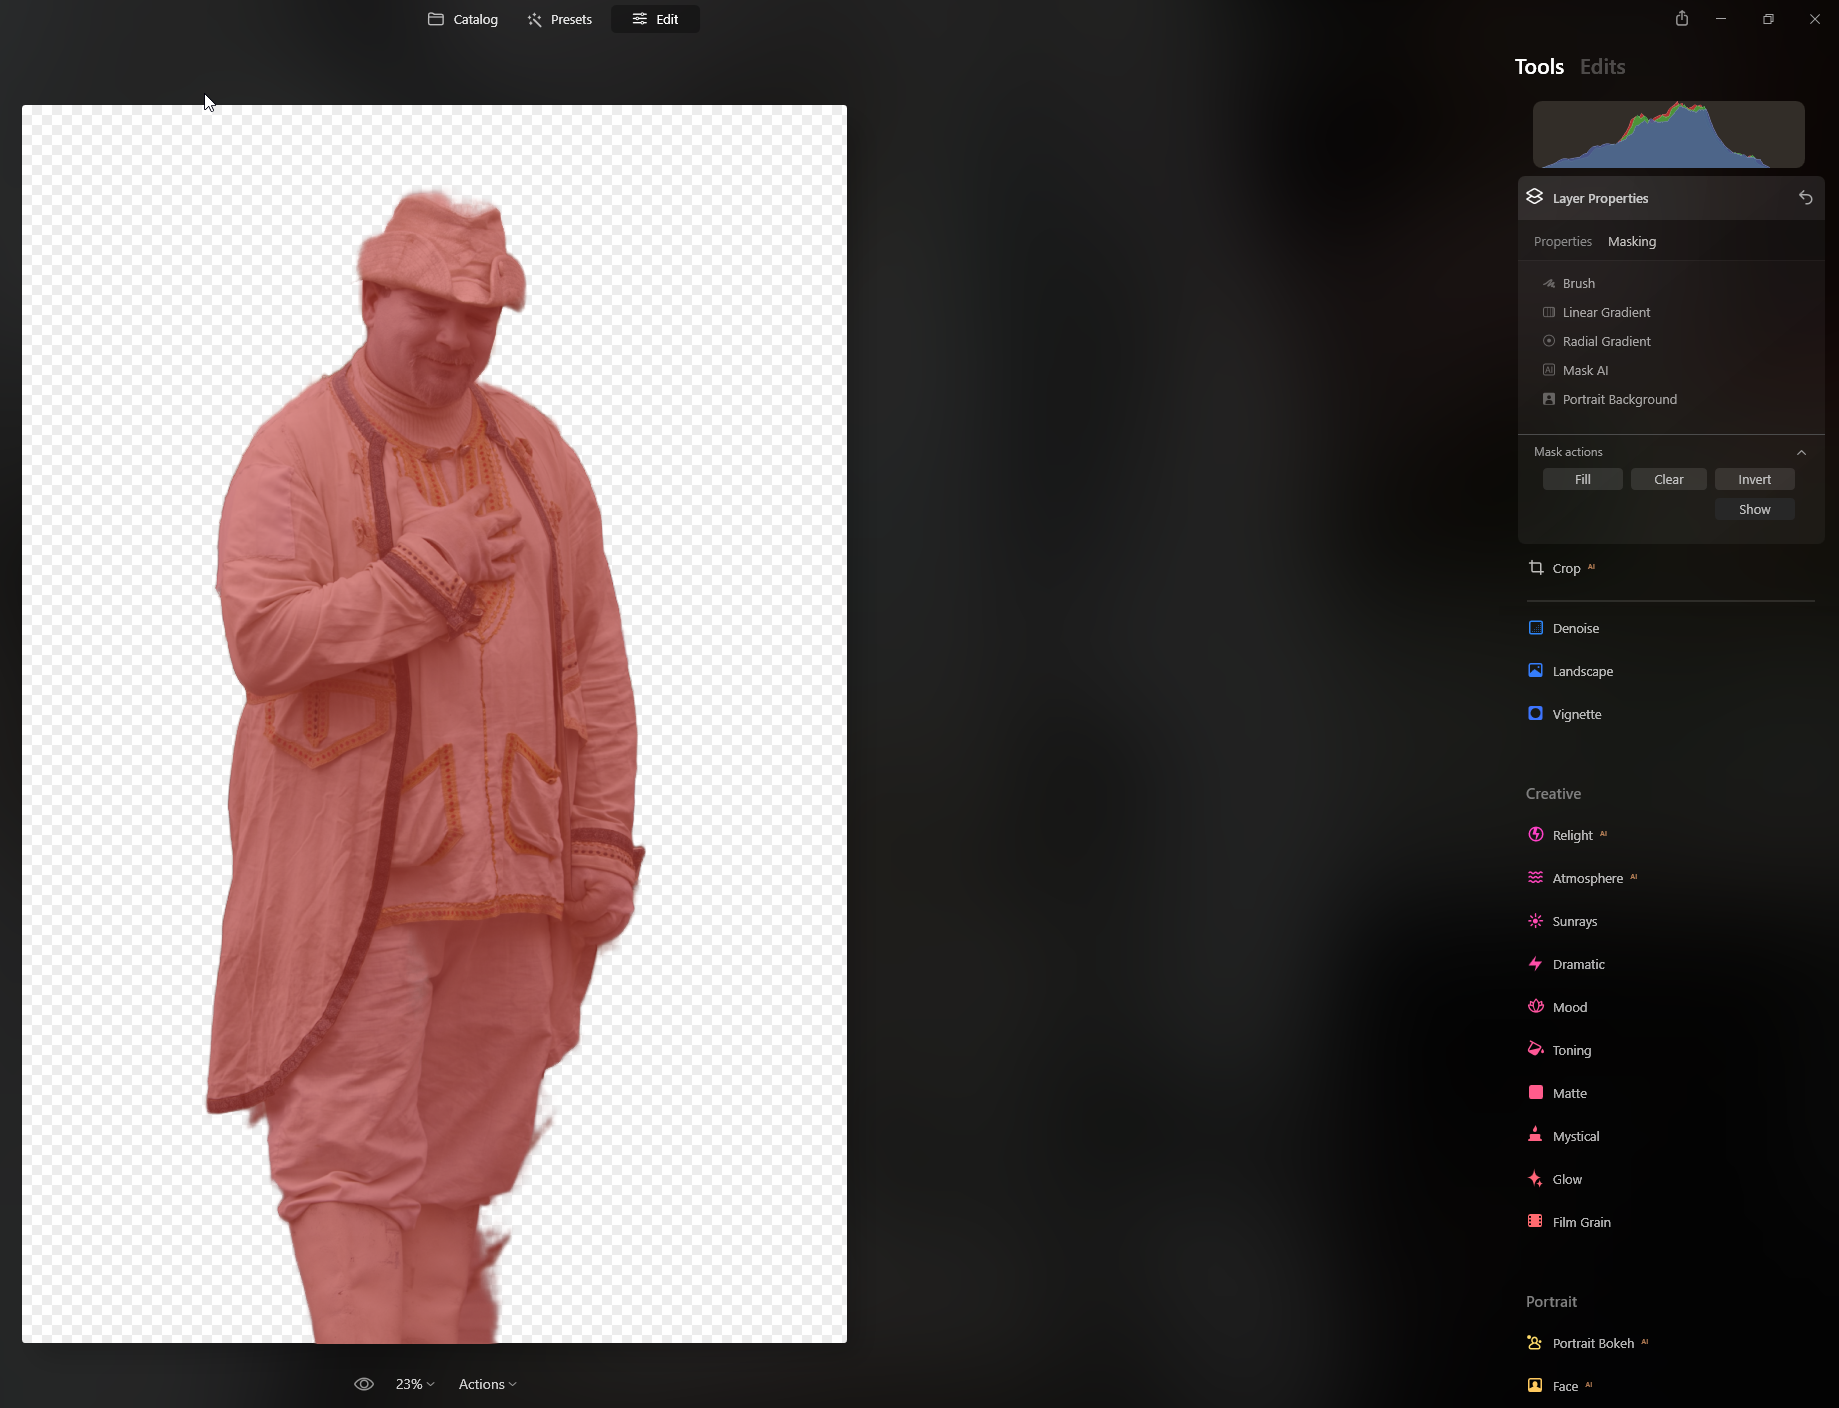 Luminar 1.1 with background removal function for portraits released